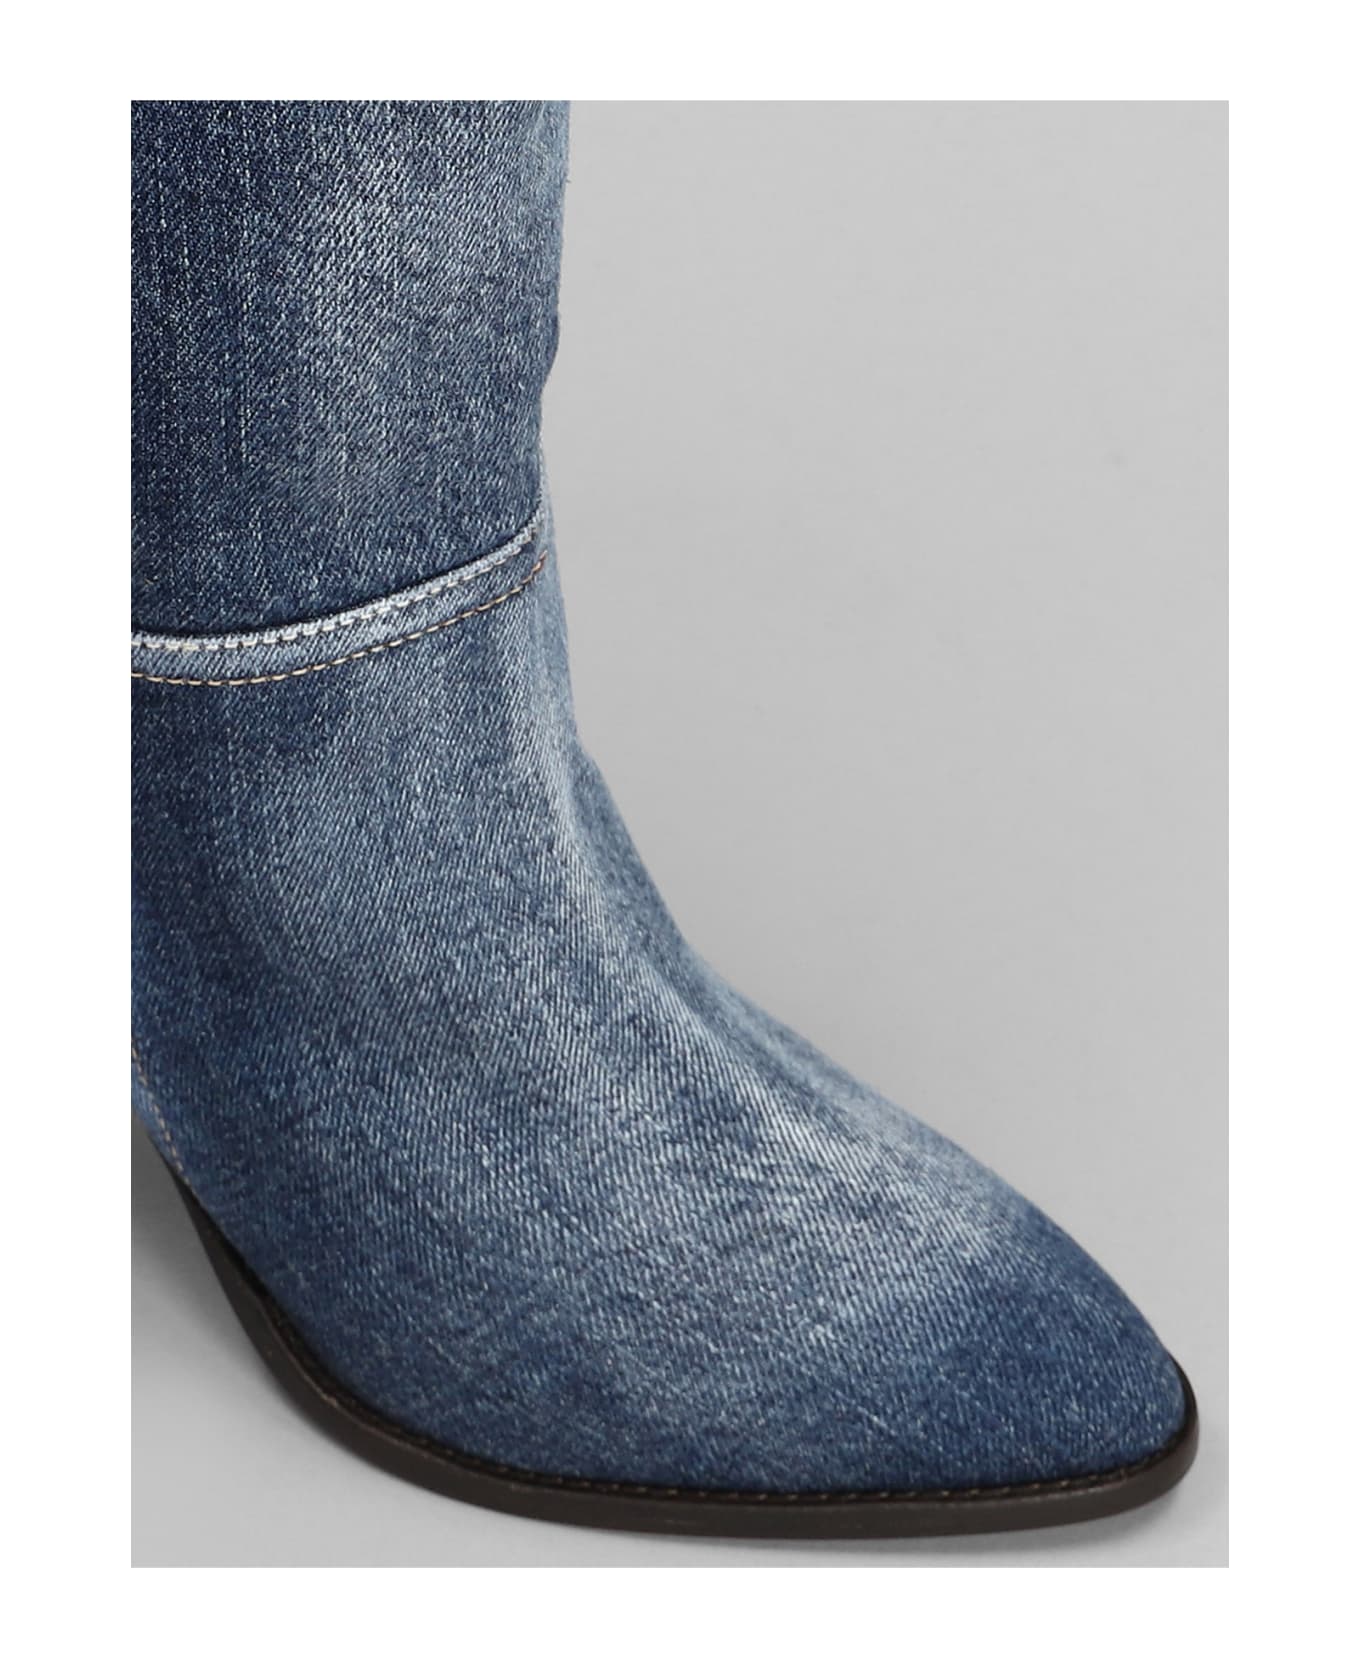 Isabel Marant Rouxa High Heels Ankle Boots - WASHED BLUE